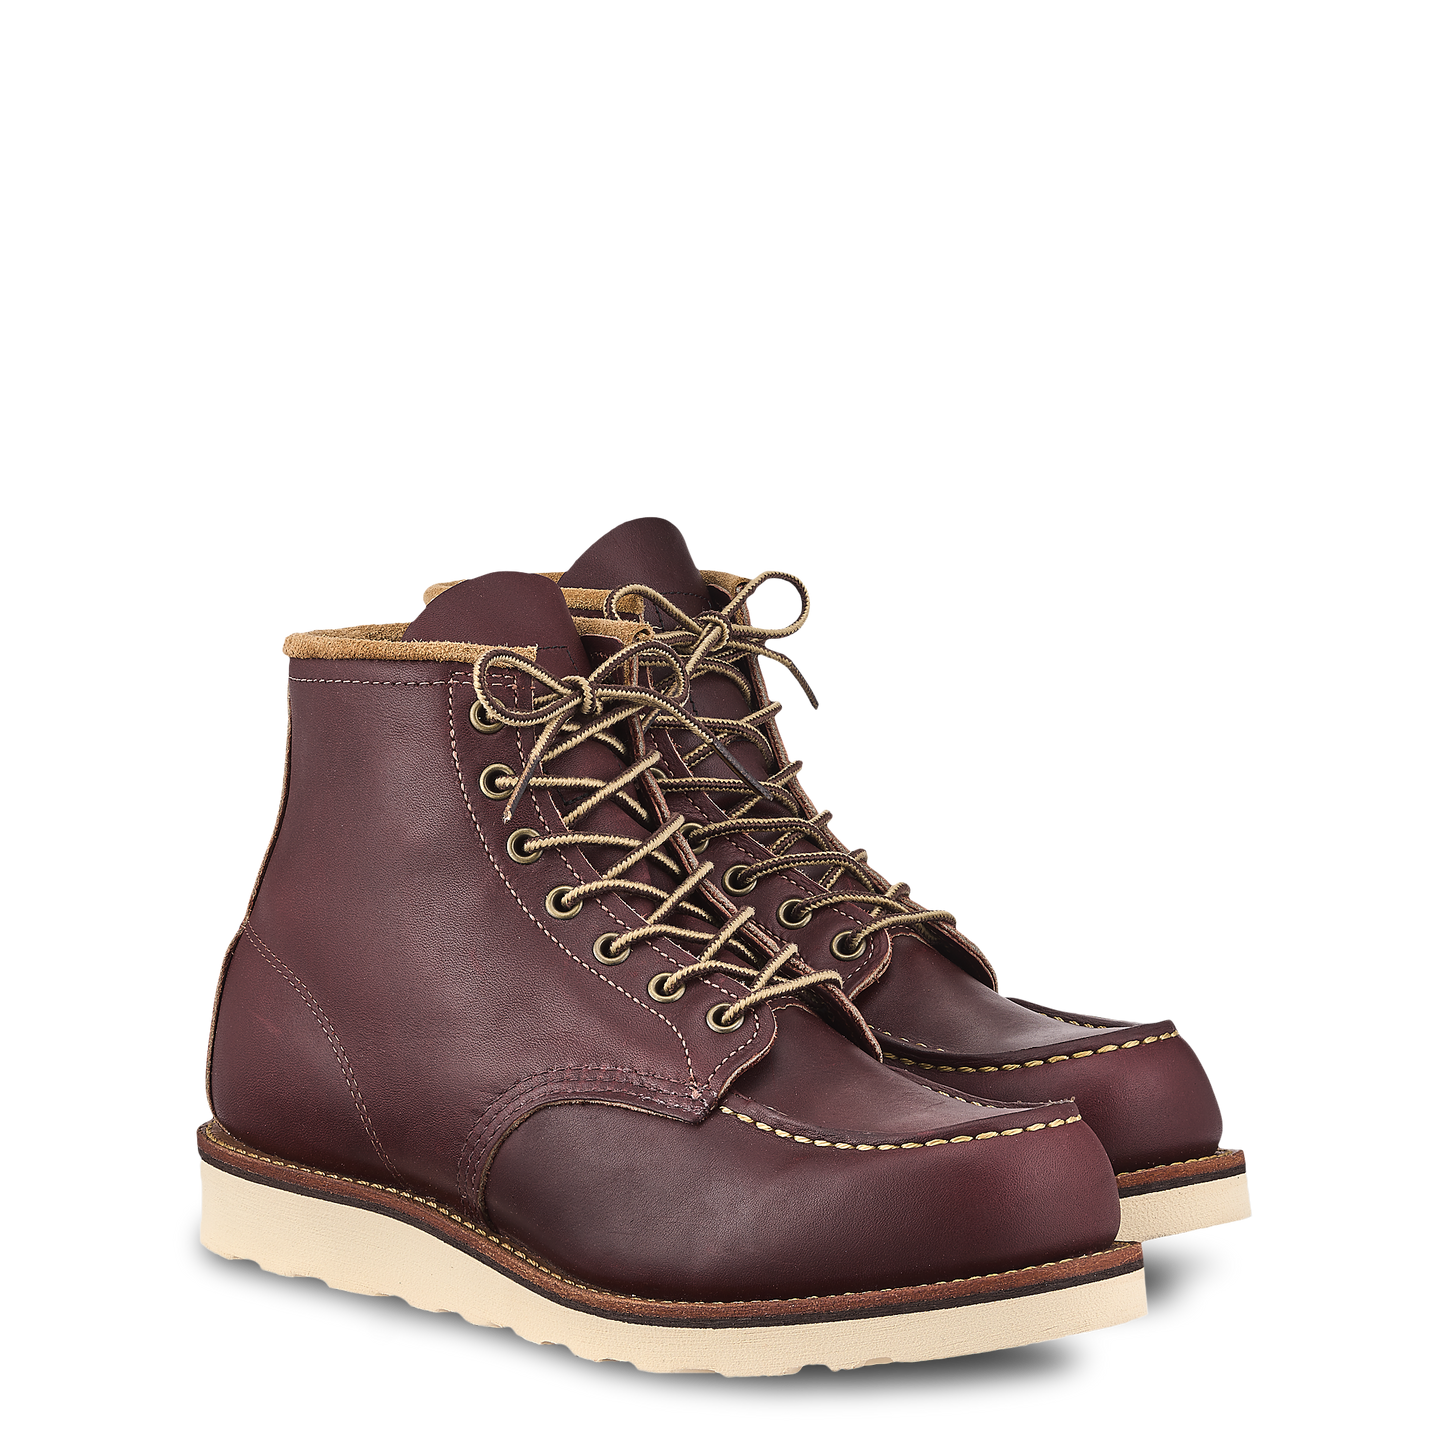 Red Wing 8856 Classic Moc Toe Boot